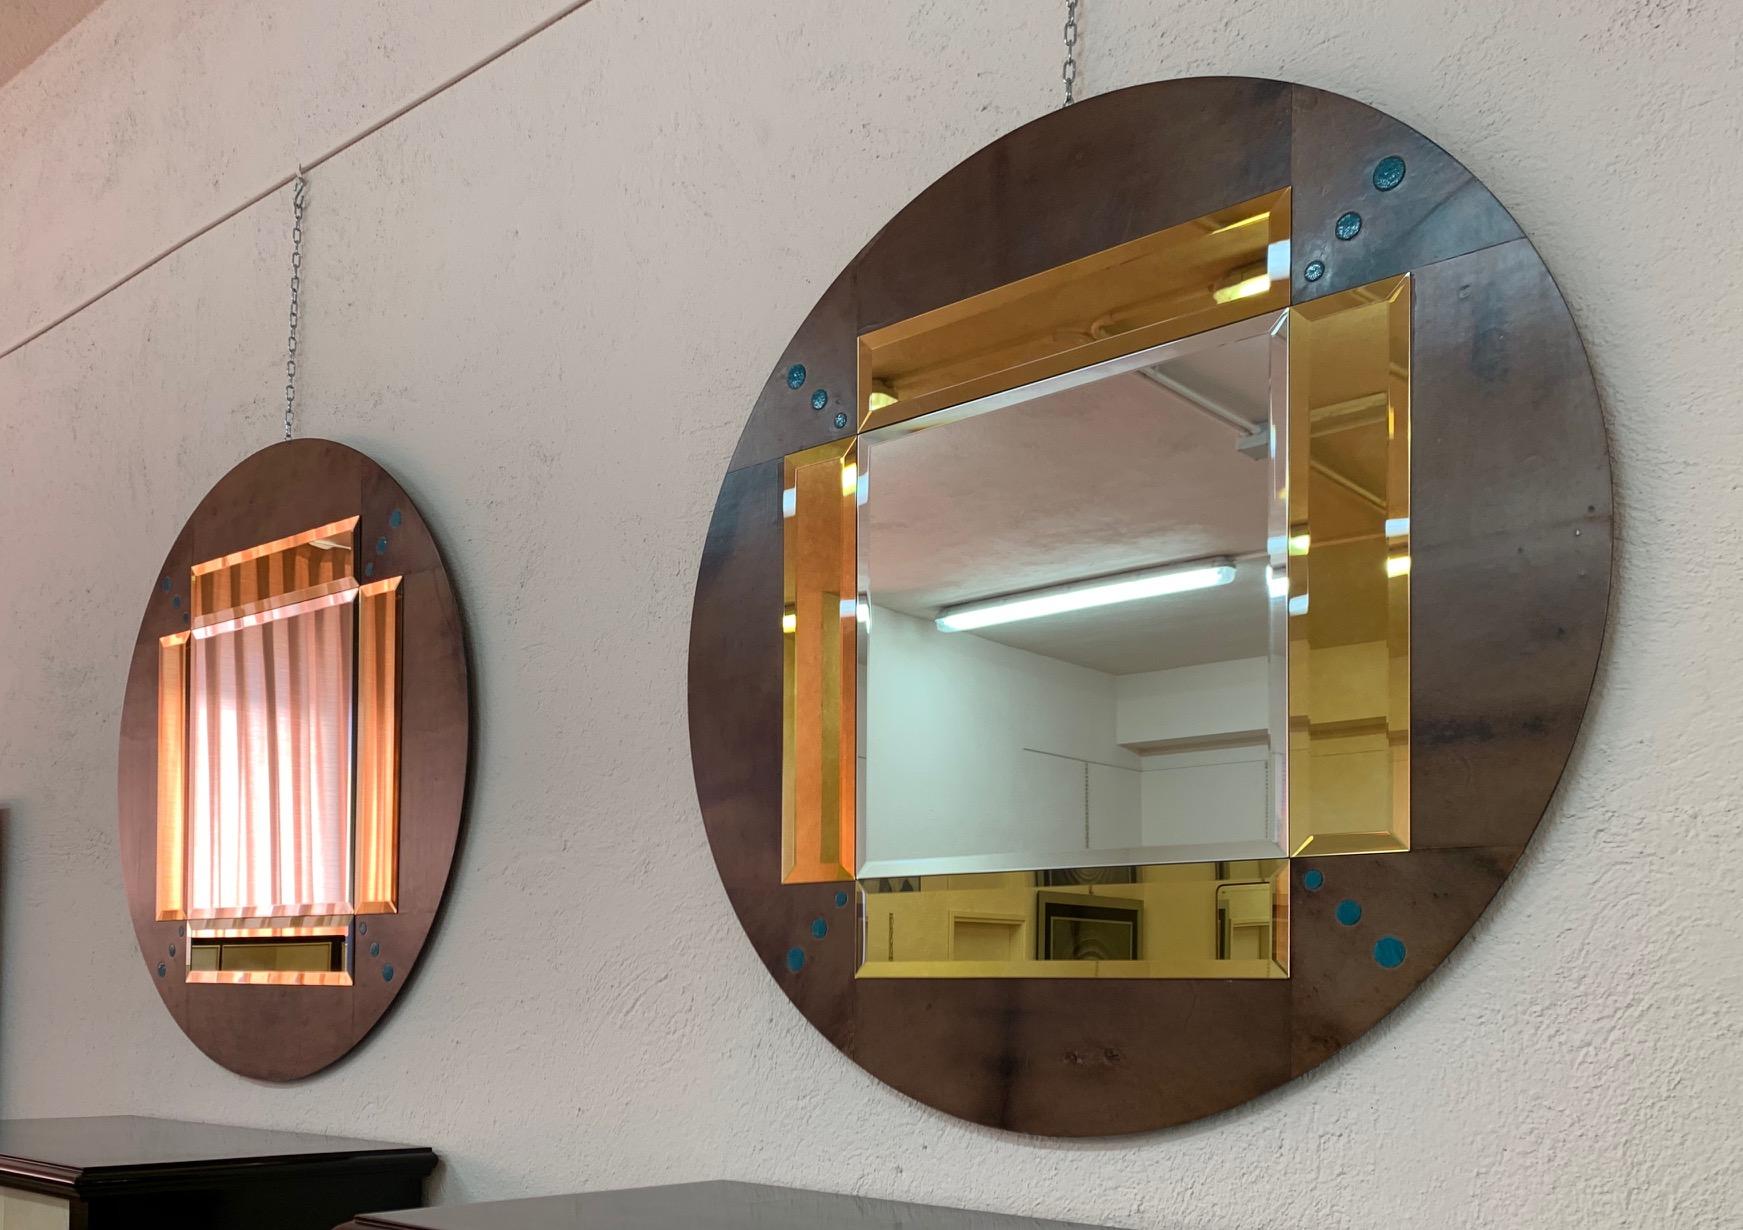 Fine pair of mirrors produced in Italy by master craftsmen.
The frame is covered in goatskin with blue Shagreen inlays.
The side mirrors are bevelled and gold colored.

Can be ordered in other combinations of finishings and sizes.